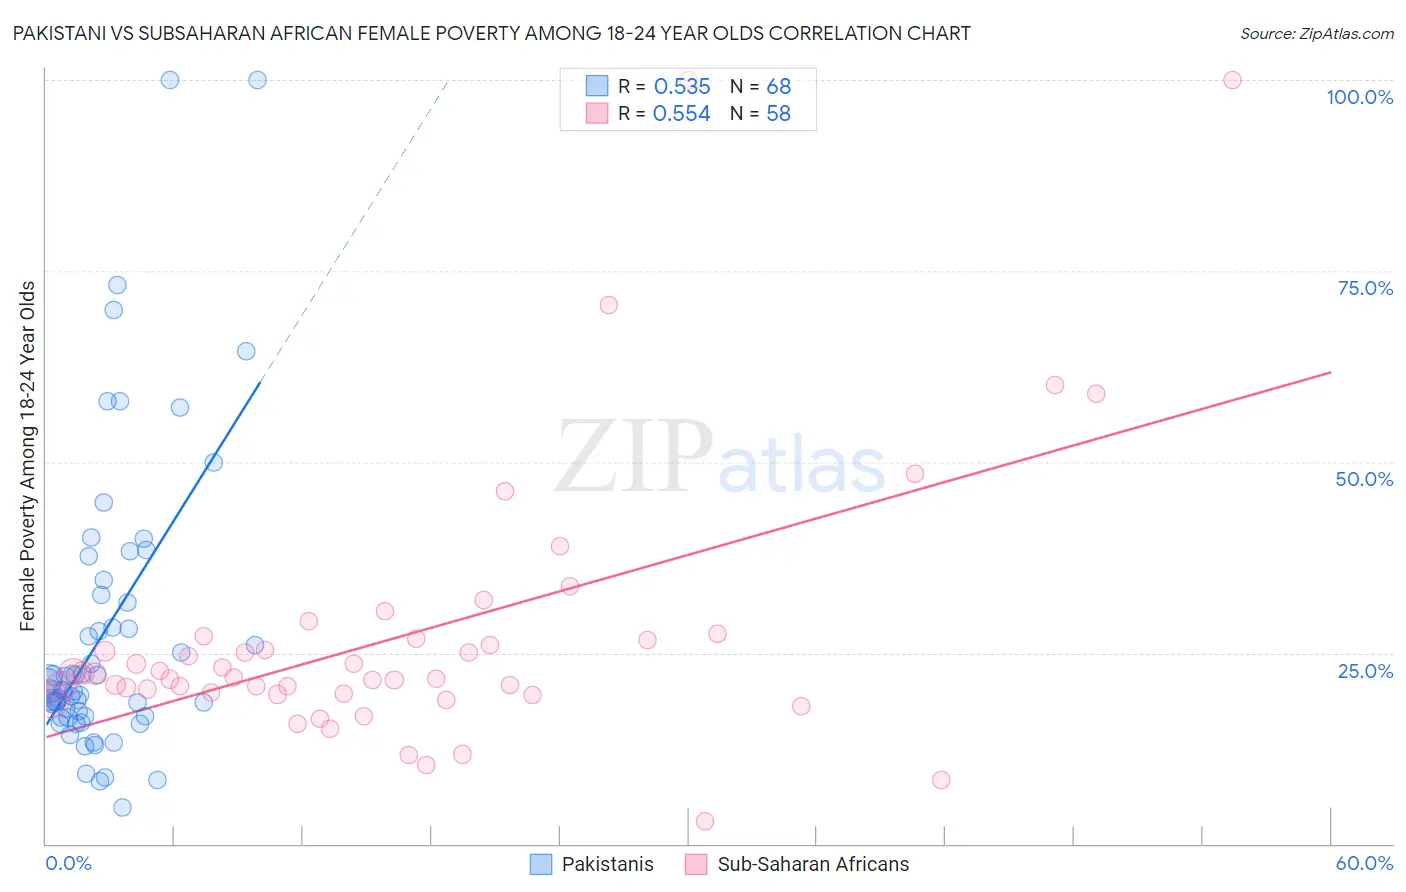 Pakistani vs Subsaharan African Female Poverty Among 18-24 Year Olds